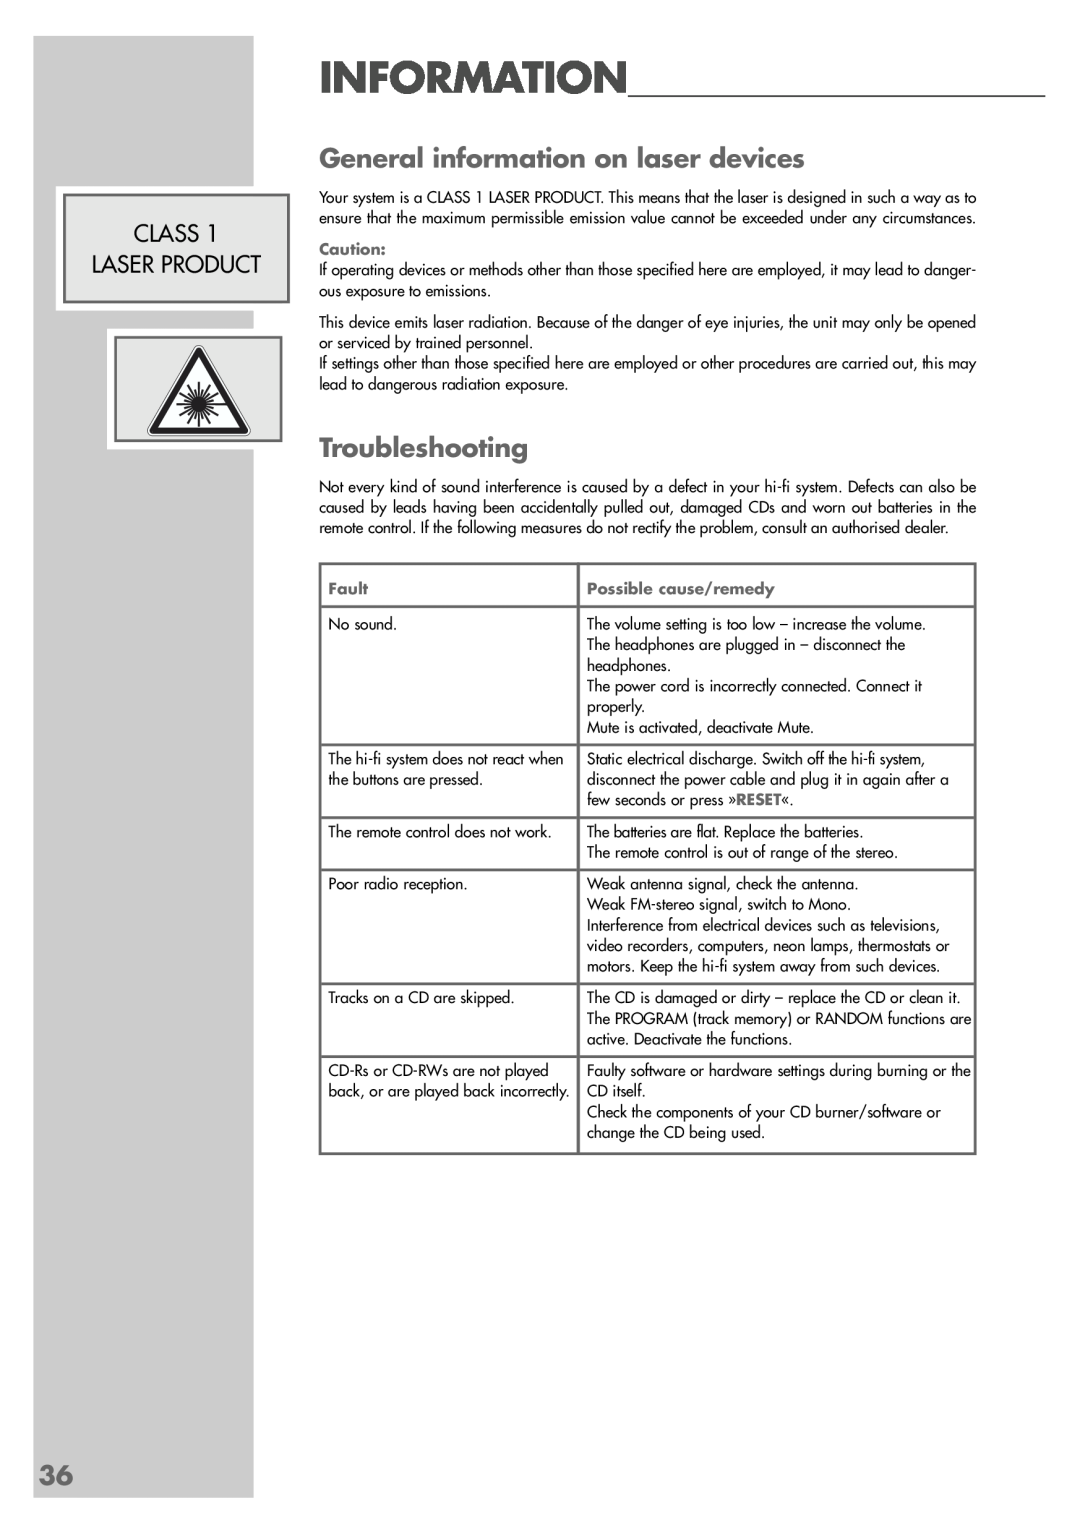 Grundig cirflexx UMS 5400 DEC manual General information on laser devices, Troubleshooting, Class Laser Product, Fault 